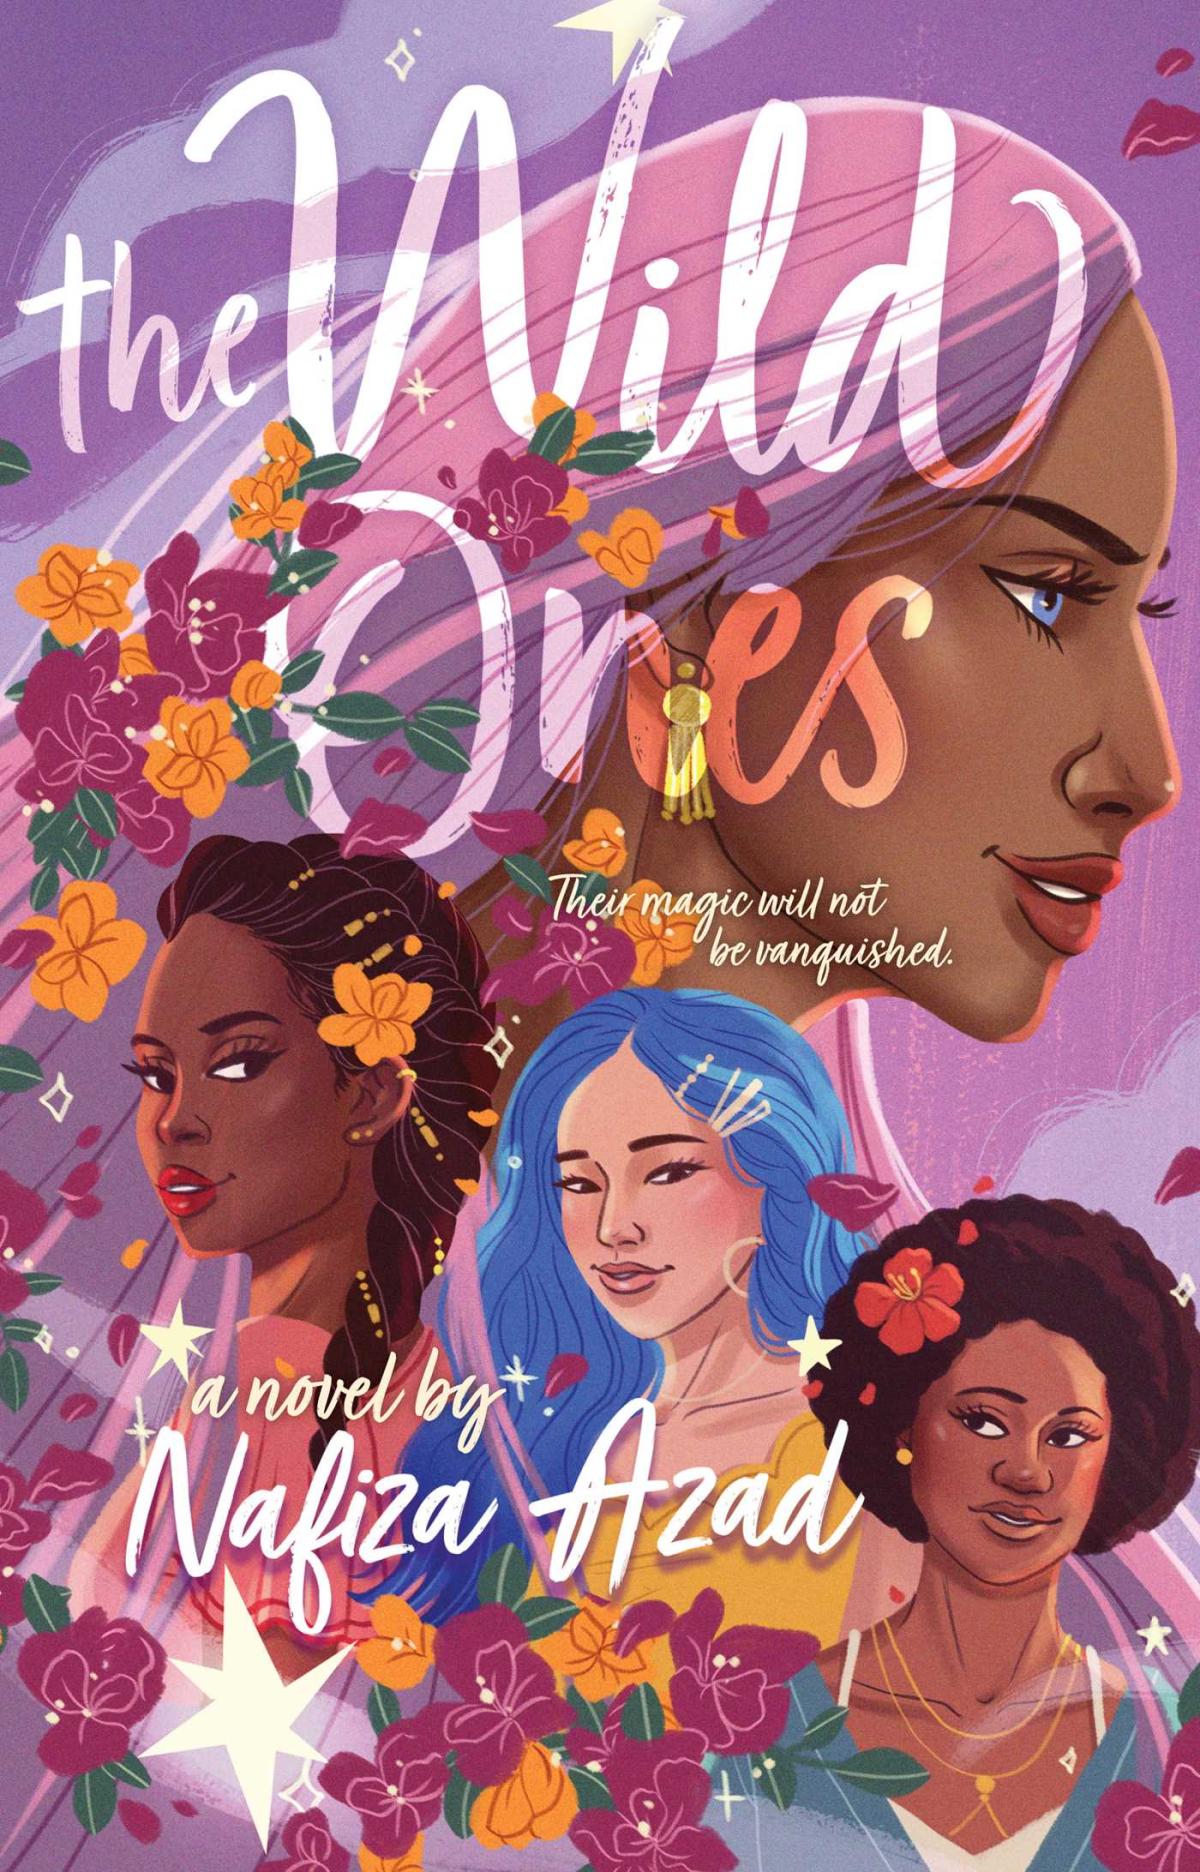 Image shown is the book cover for Nafiza Azad's The Wild Ones